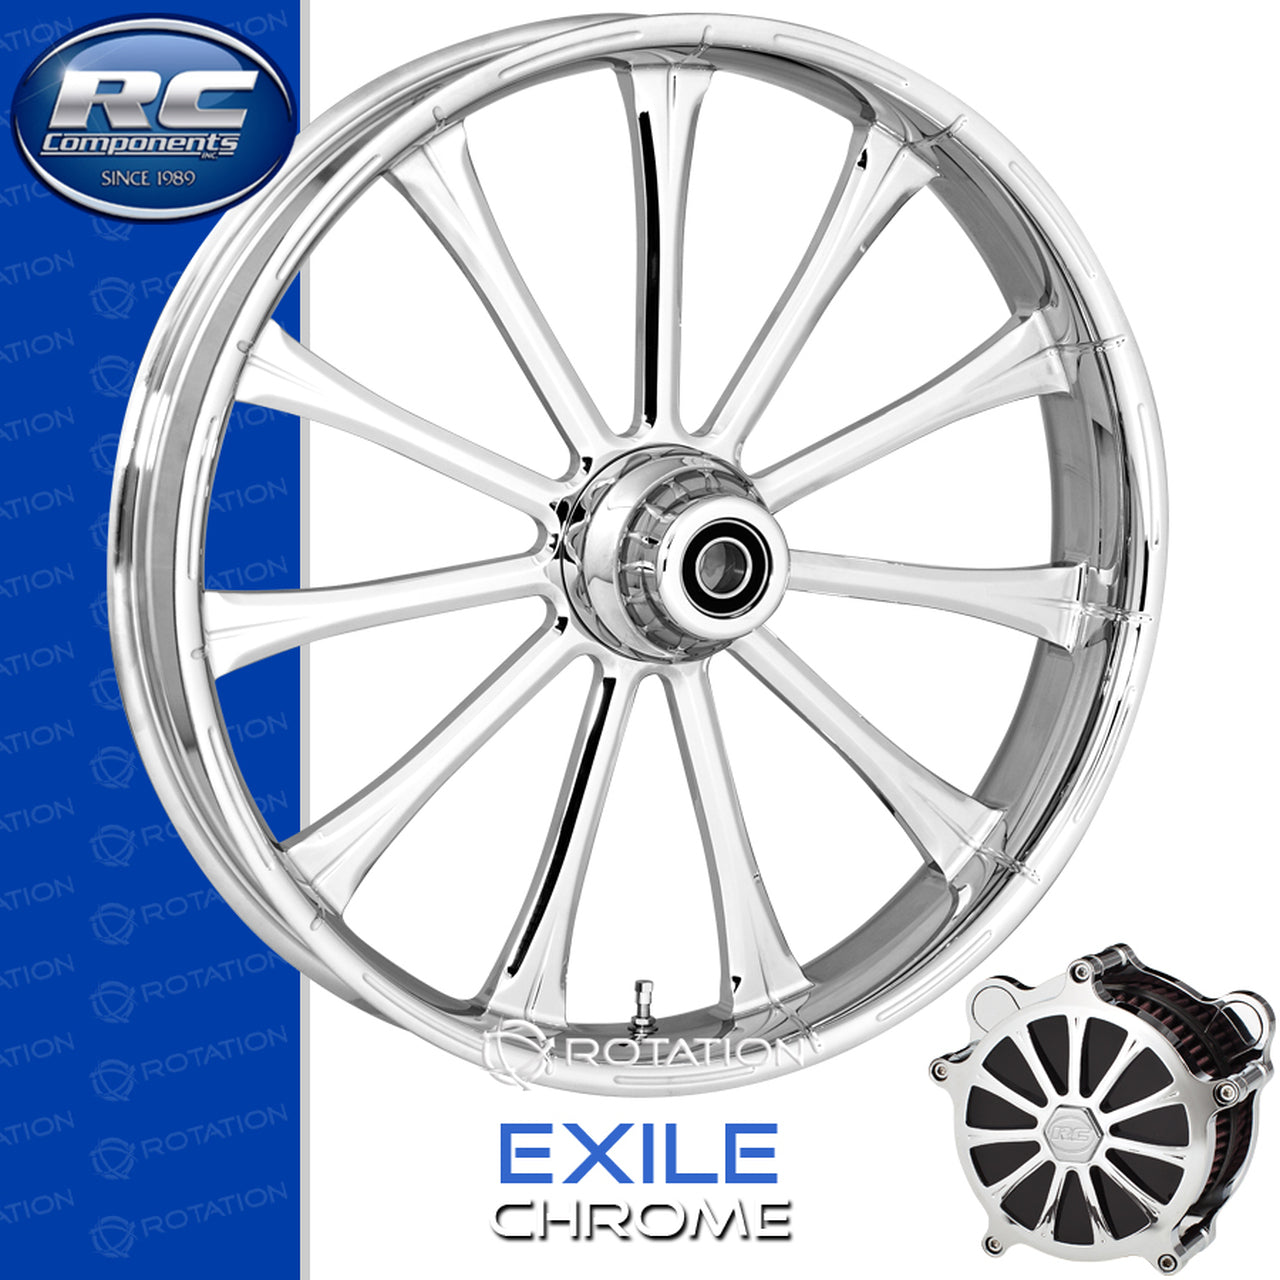 RC Components Exile Chrome Touring Wheel